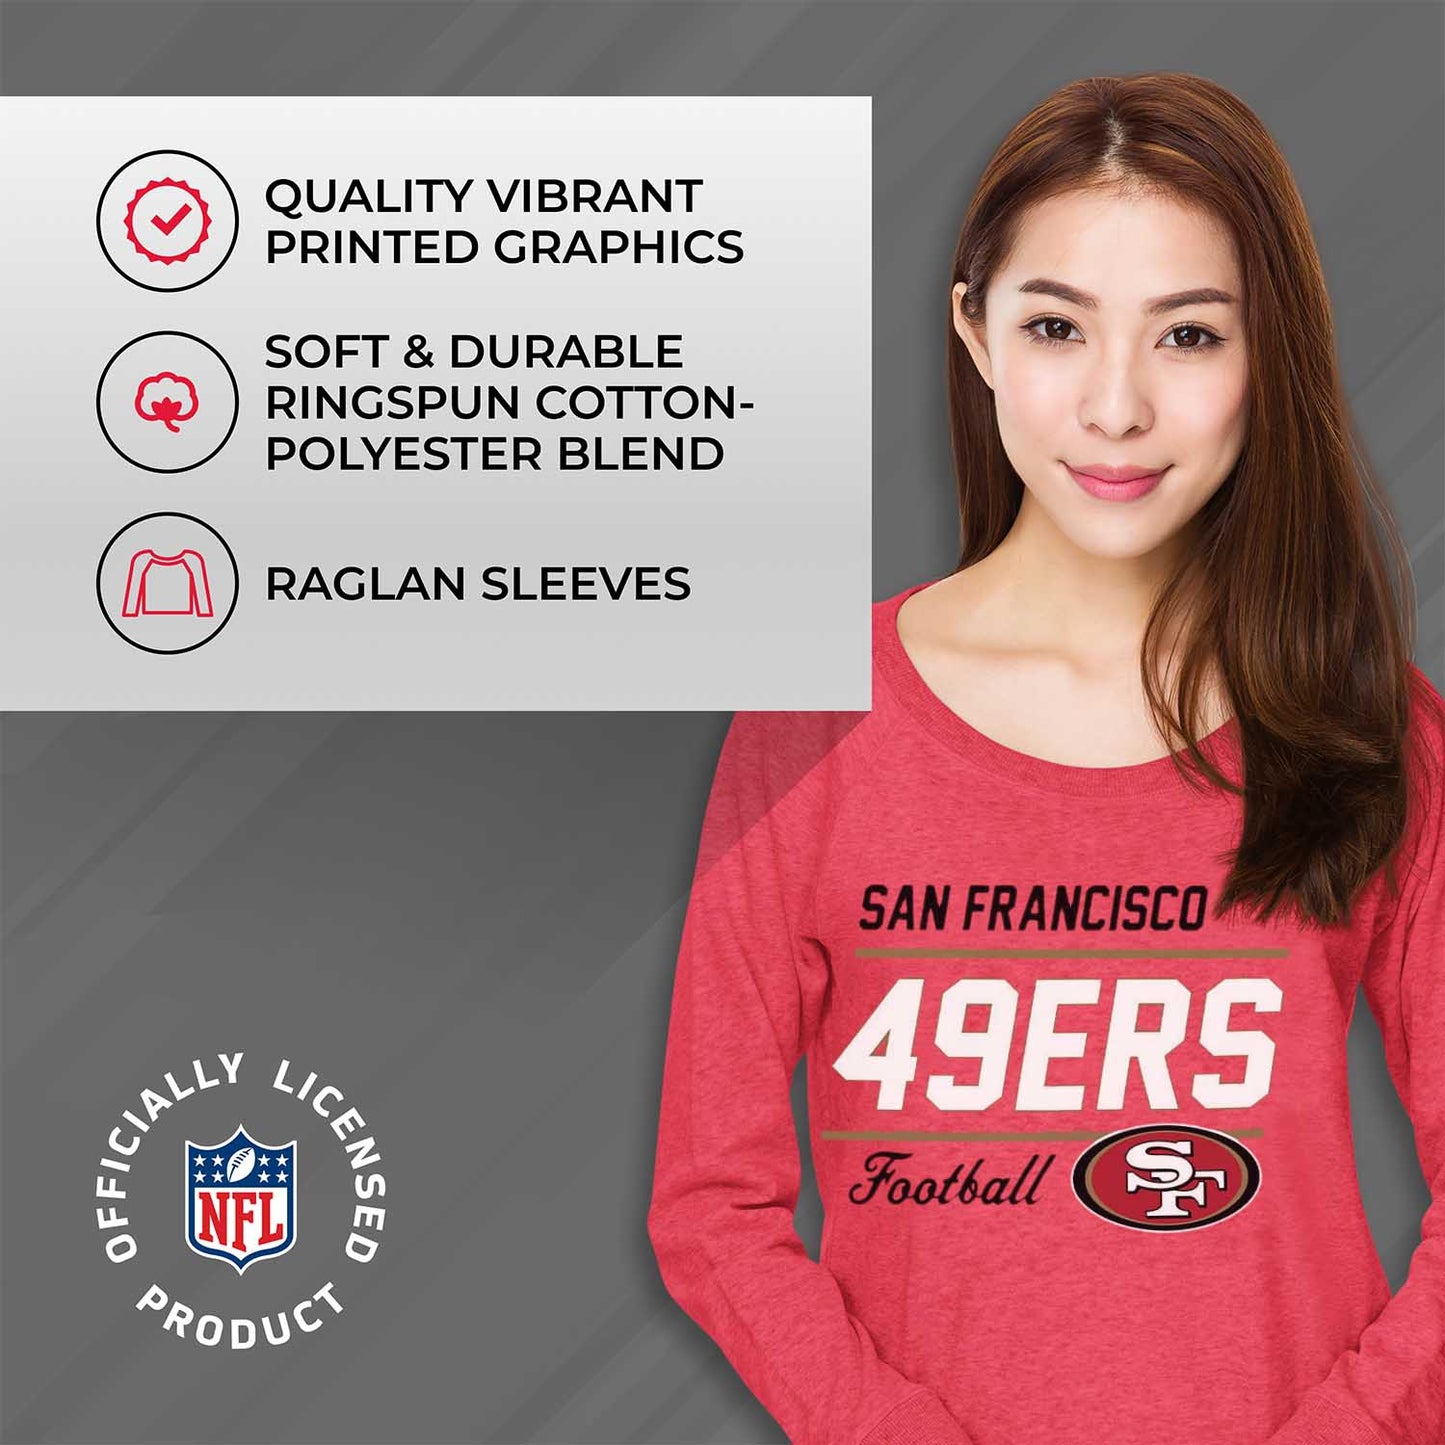 San Francisco 49ers NFL Womens Crew Neck Light Weight - Red